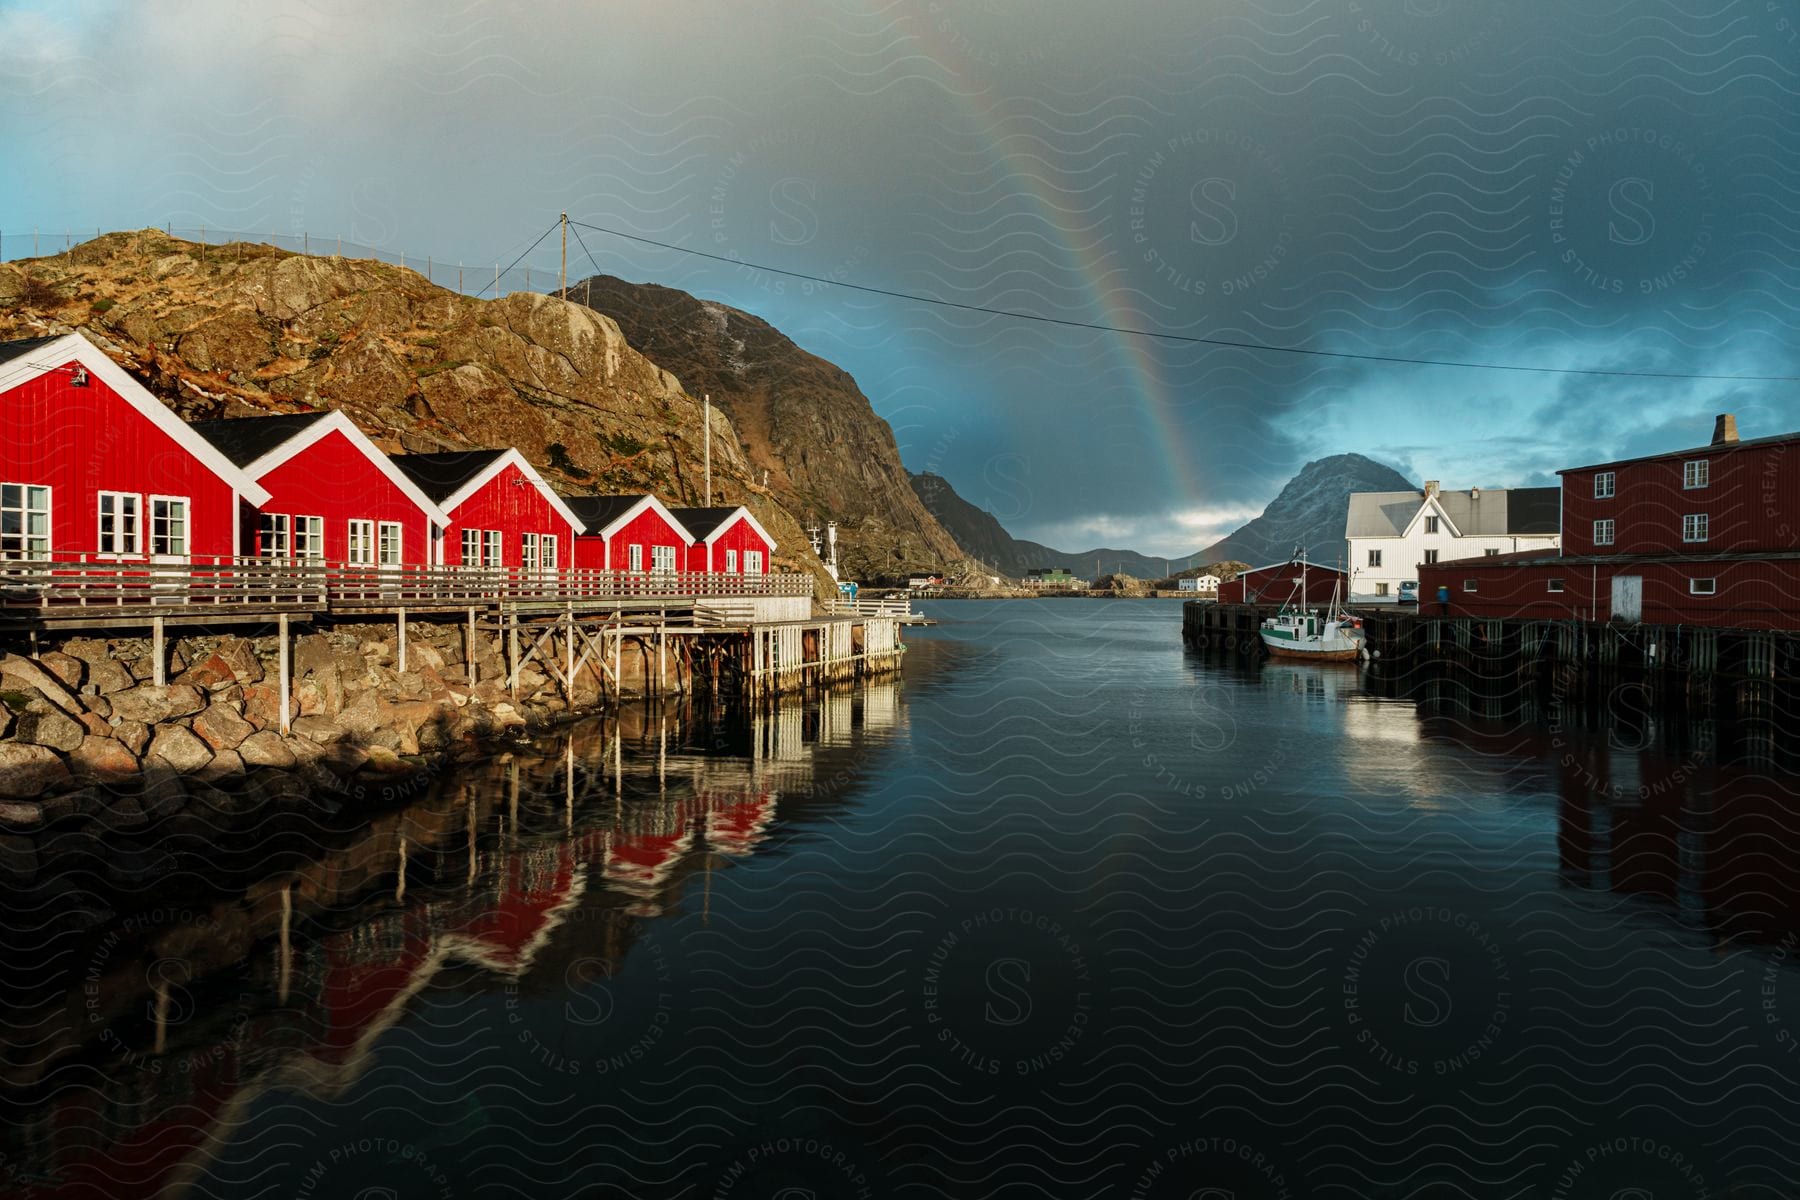 Coastal island with red houses mountains and rainbow on the horizon